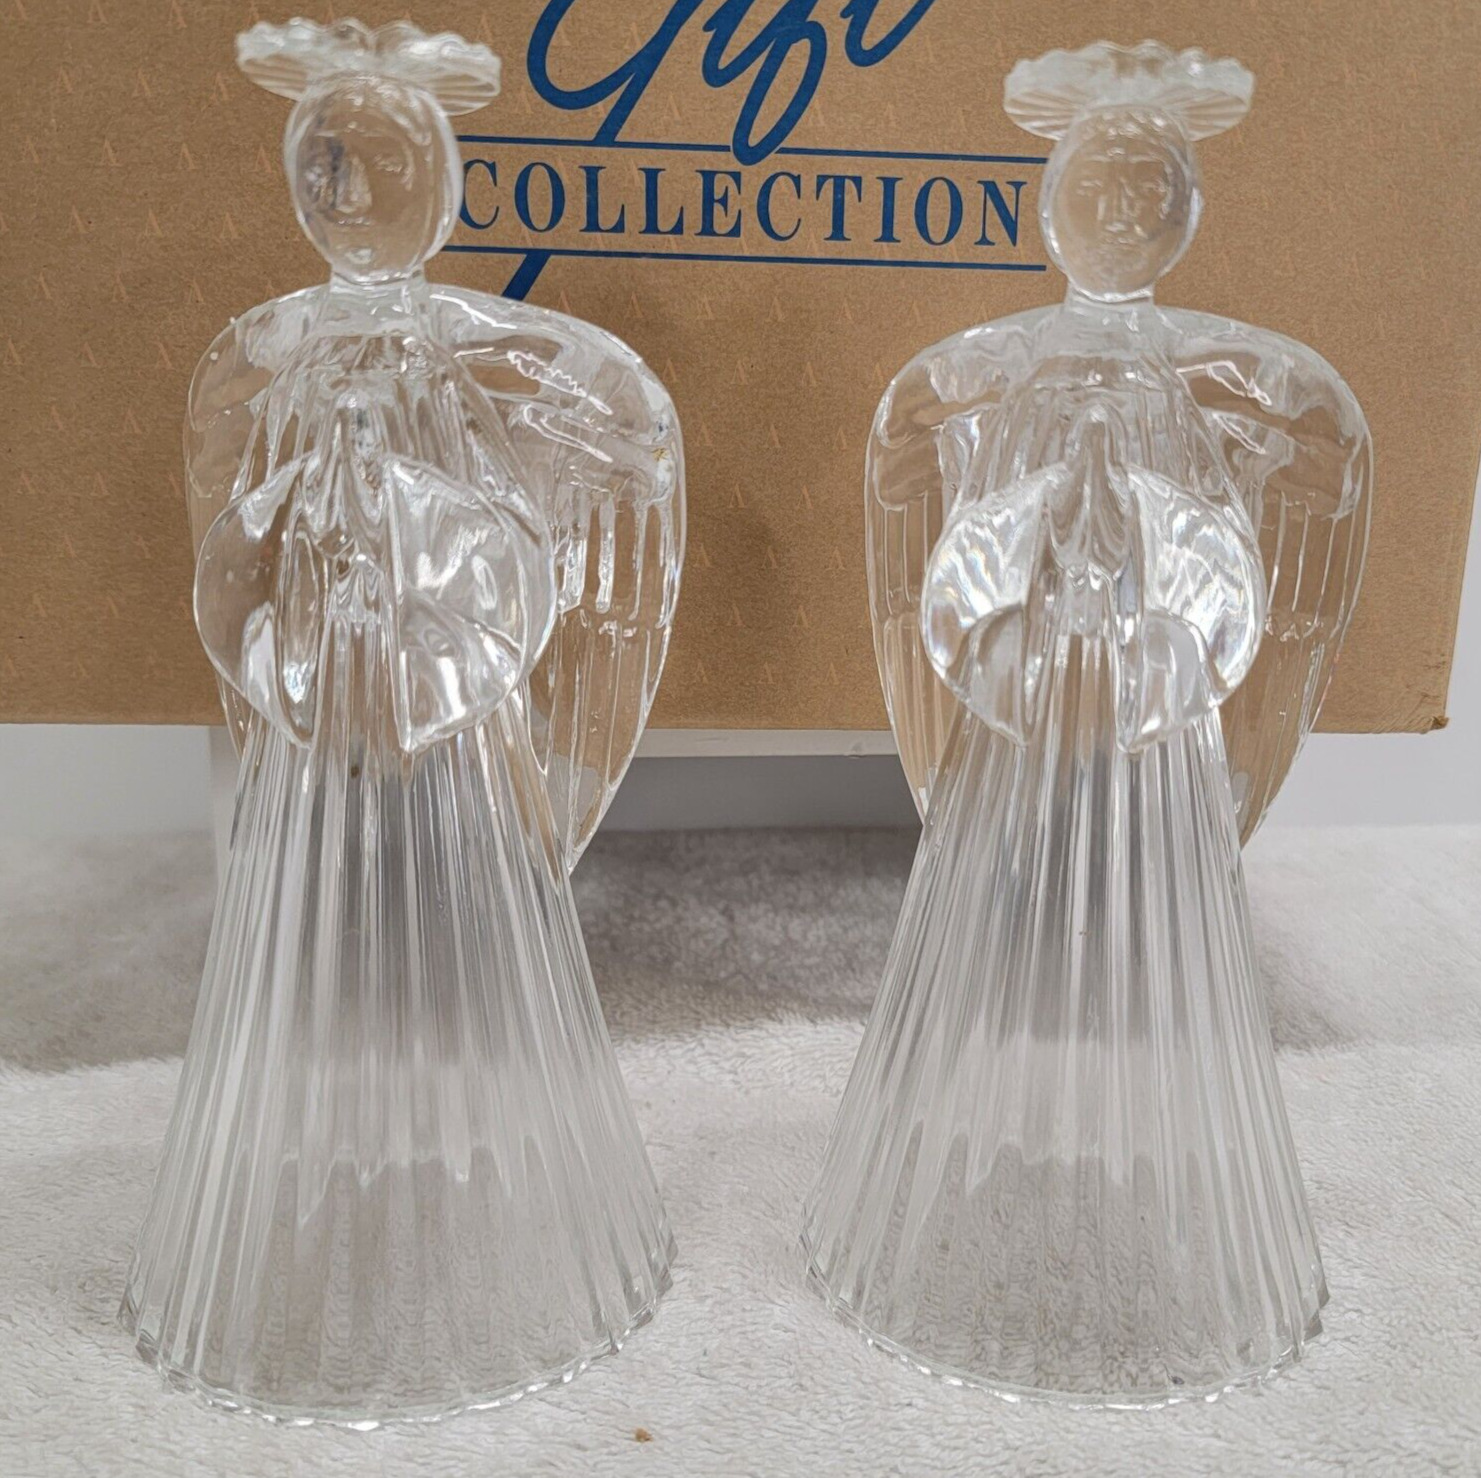 Vintage Avon Glowing Angel Crystal Candlesticks 1992 SET OF 2 WITH BOX 24% Lead